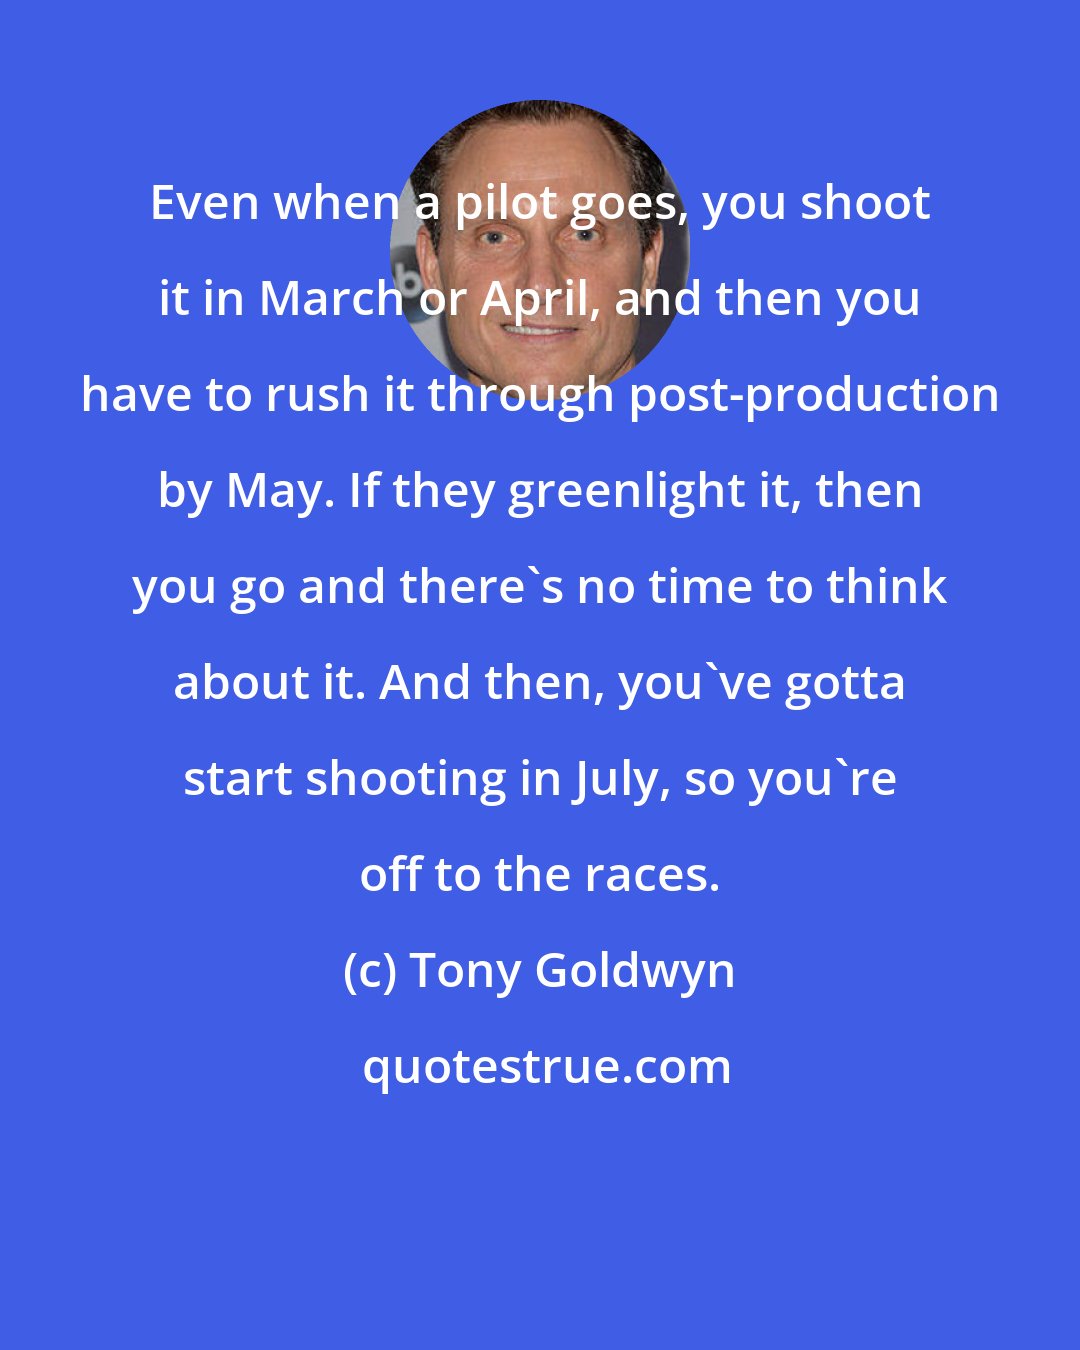 Tony Goldwyn: Even when a pilot goes, you shoot it in March or April, and then you have to rush it through post-production by May. If they greenlight it, then you go and there's no time to think about it. And then, you've gotta start shooting in July, so you're off to the races.